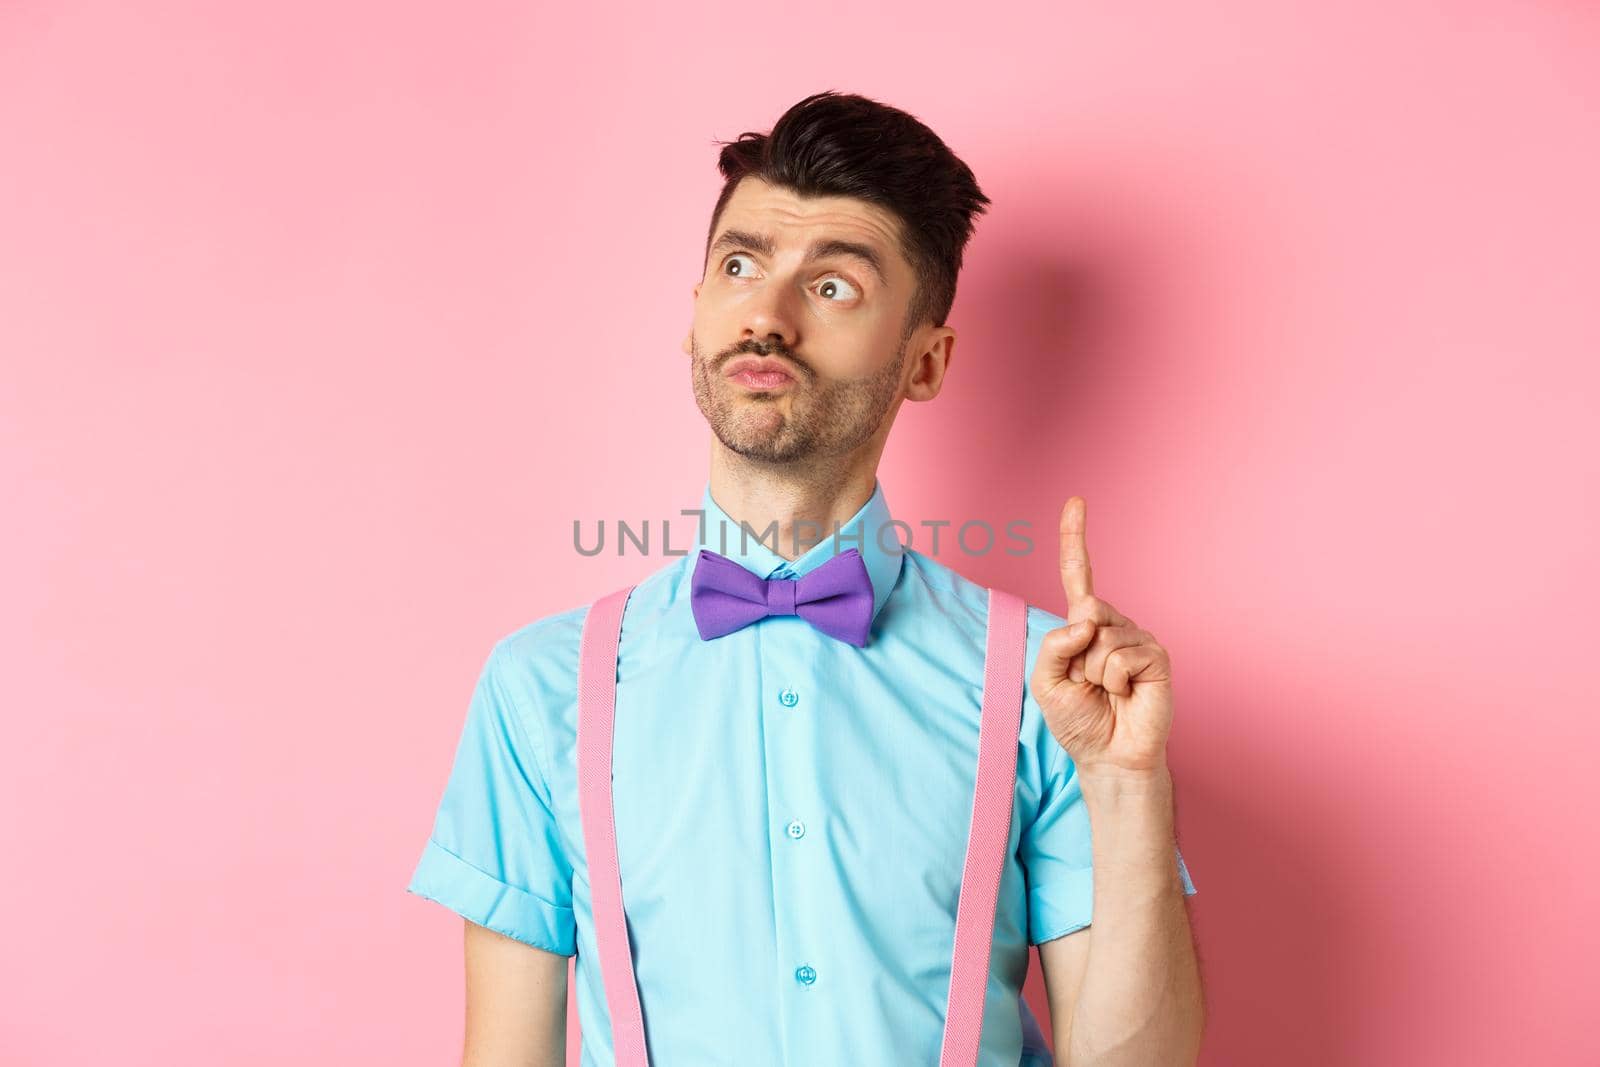 Pensive handsome man in bow-tie pitching an idea, raising index finger while looking away with thoughtful face, standing on pink background.